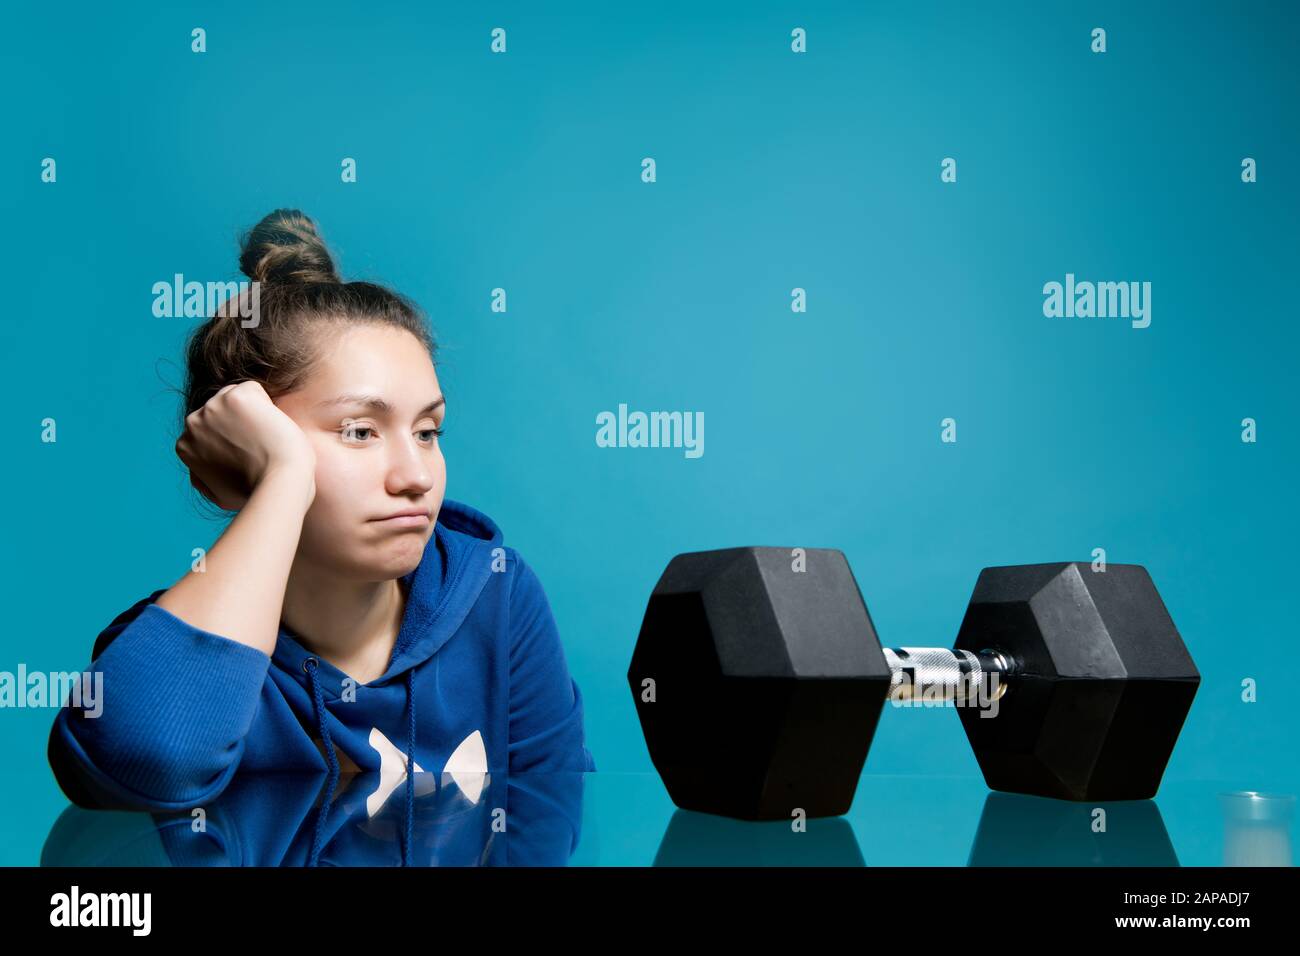 the girl looks in frustration and longing at the big dumbbell lying in front of her, close up Stock Photo